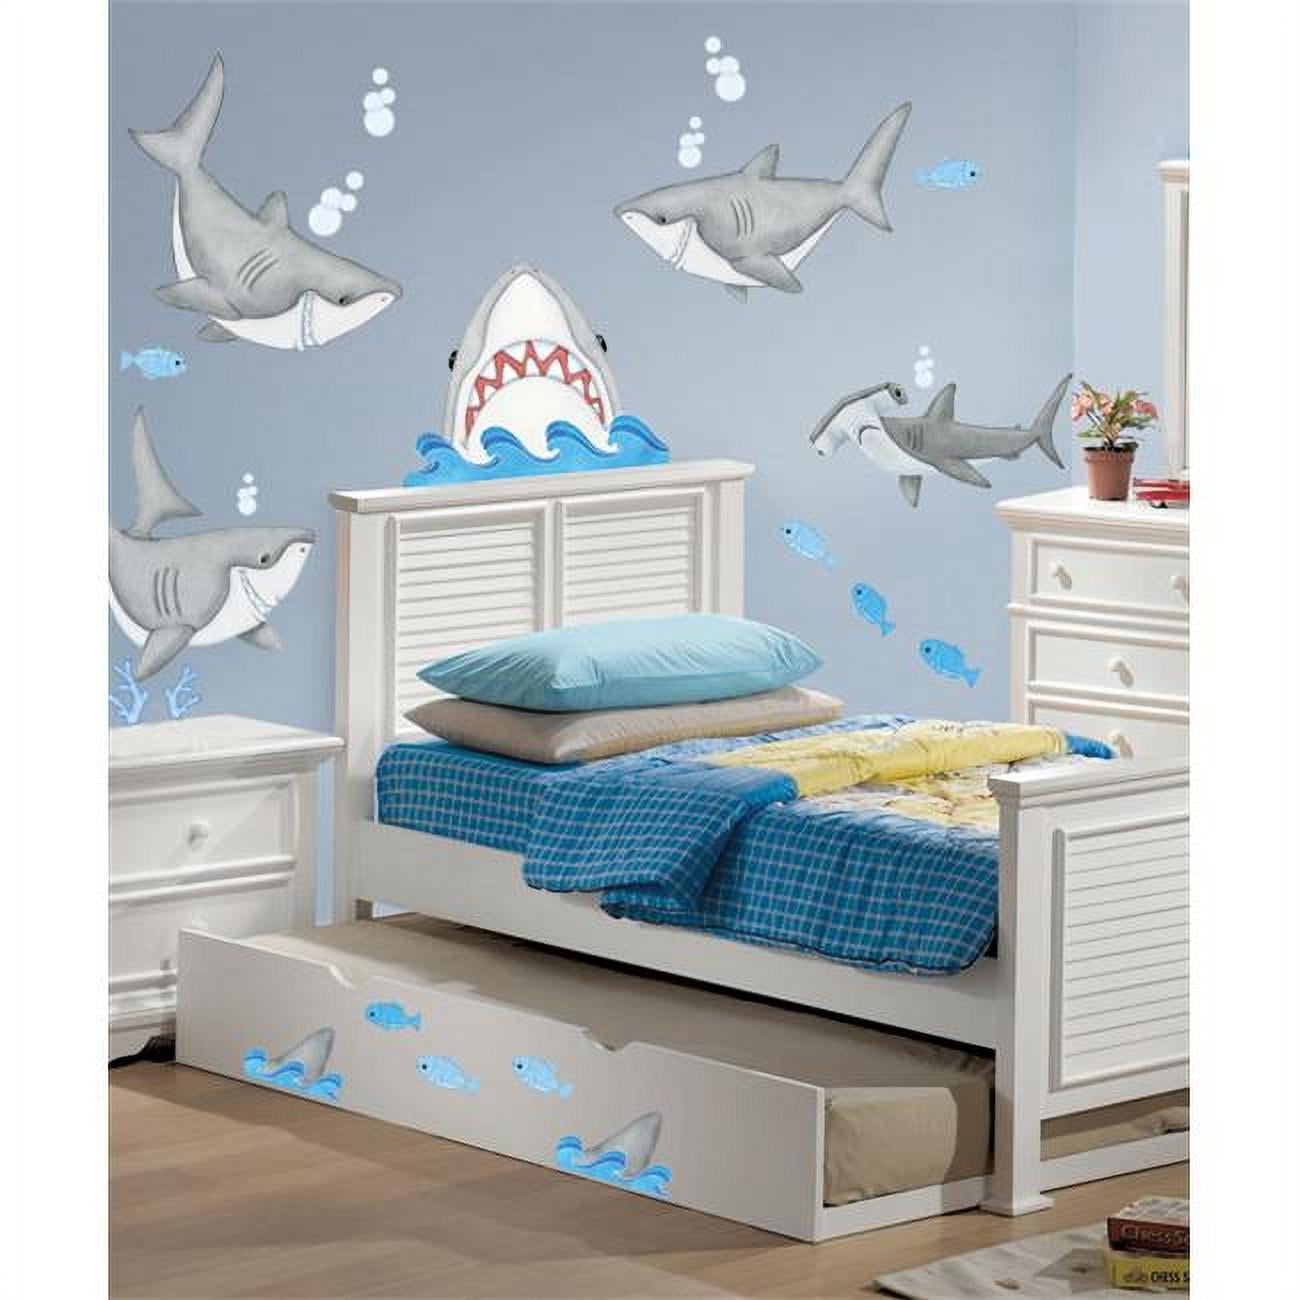 Picture of Borders Unlimited 10007 Fishn Sharks Super Jumbo Applique